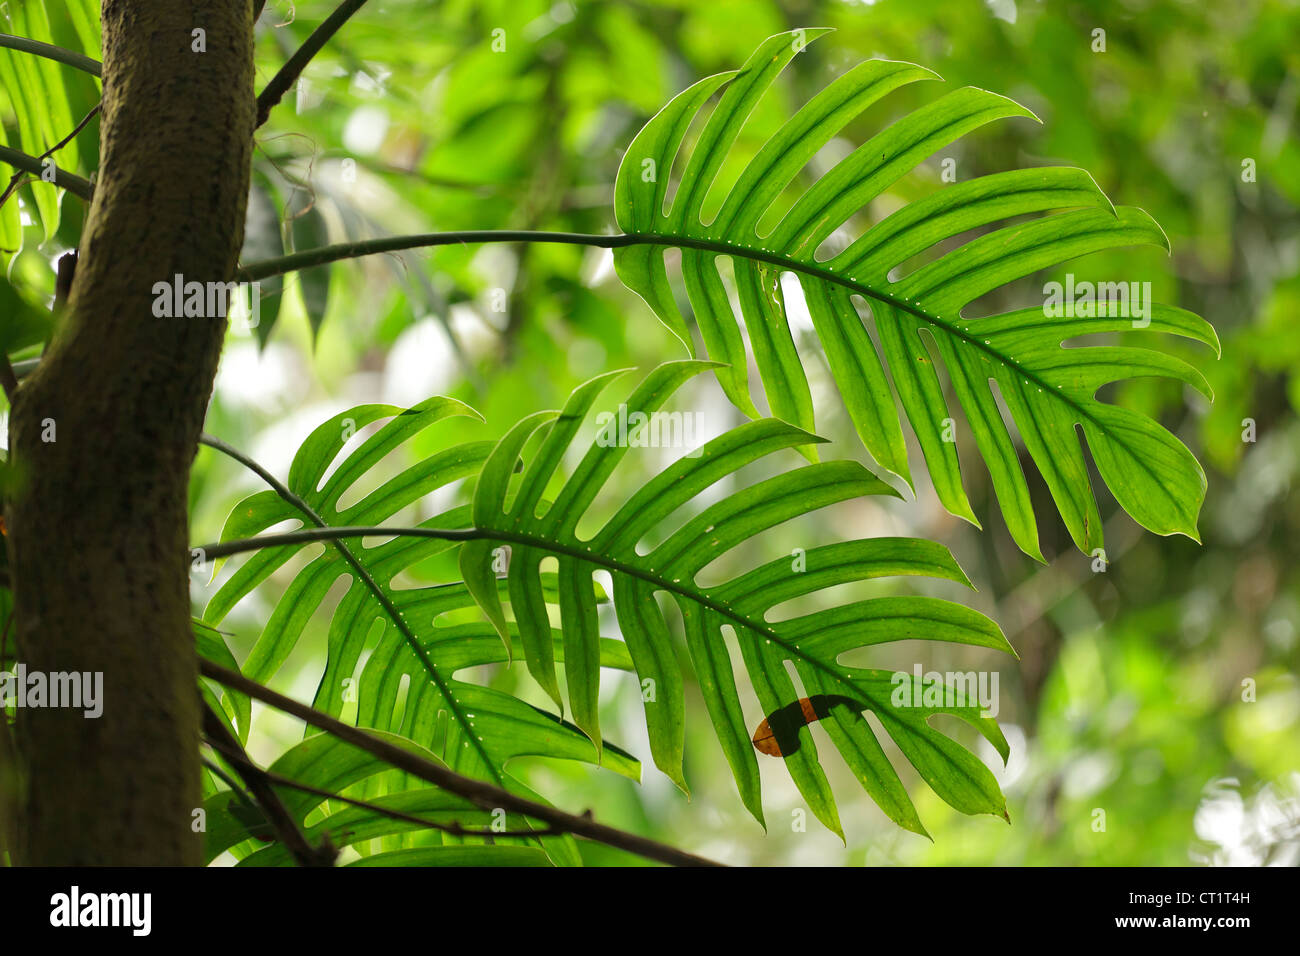 Philodendron leaves in tropical rainforest Stock Photo